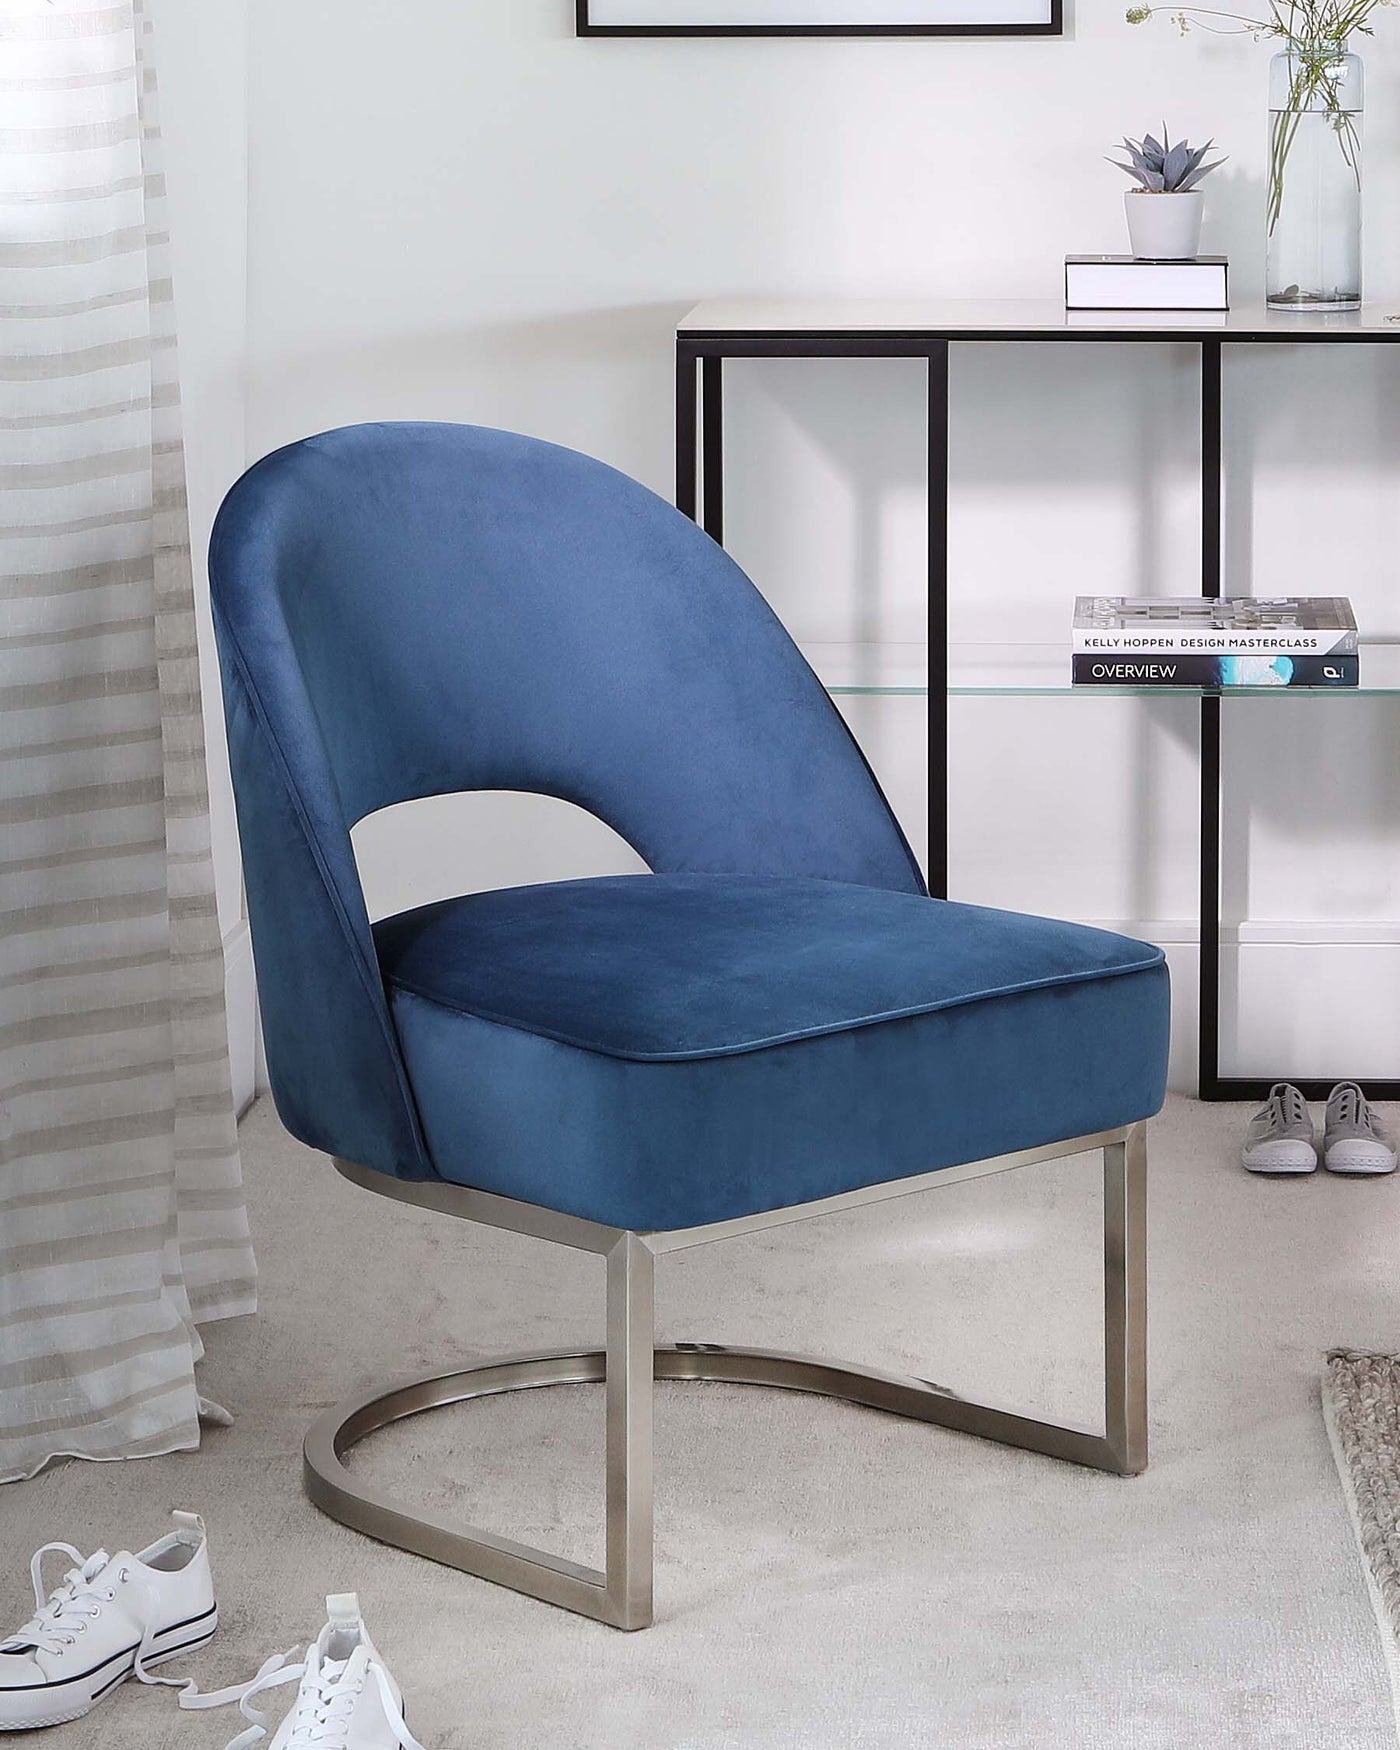 Elegant modern blue velvet accent chair with a unique curved backrest and a cut-out design, seated on a smooth, metallic silver U-shaped base, positioned next to a minimalist black metal console table with a clear glass top displaying books and a decorative vase.